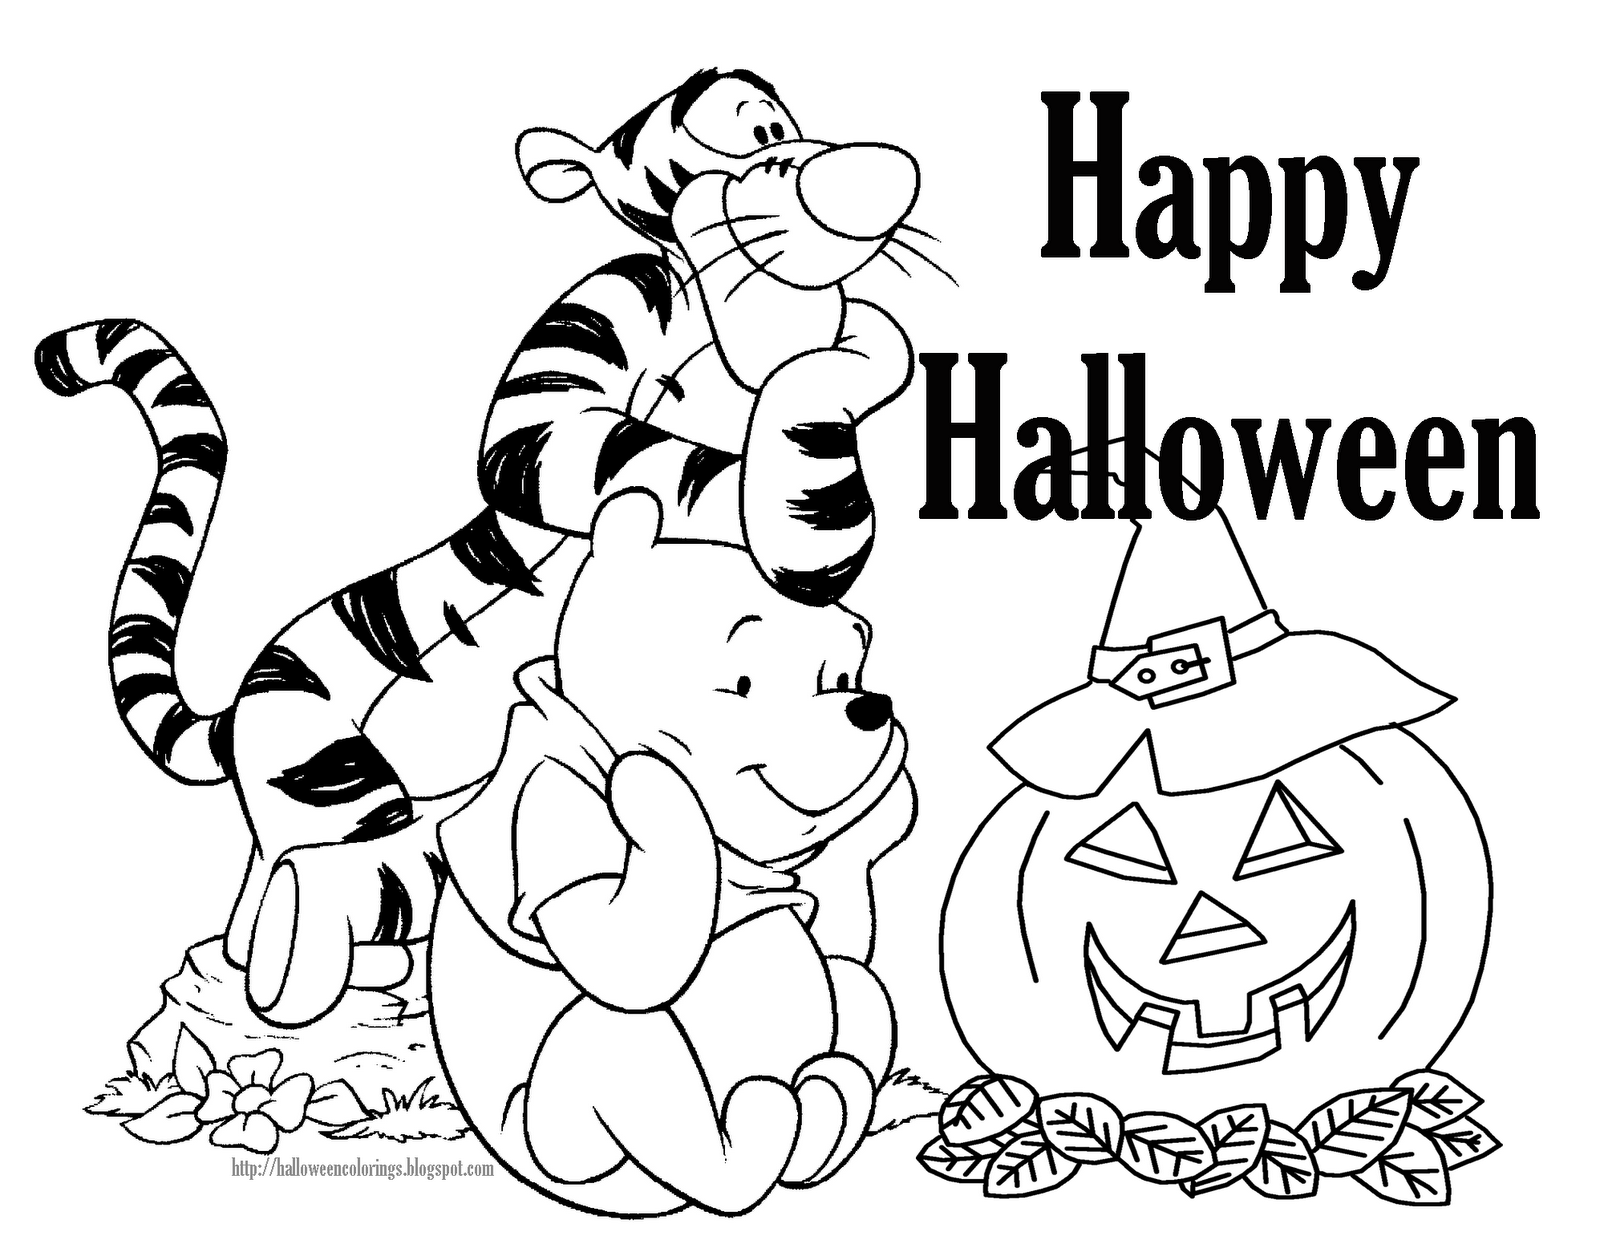 Halloween Coloring Page Printable   Free Coloring Pages   Coloring ...